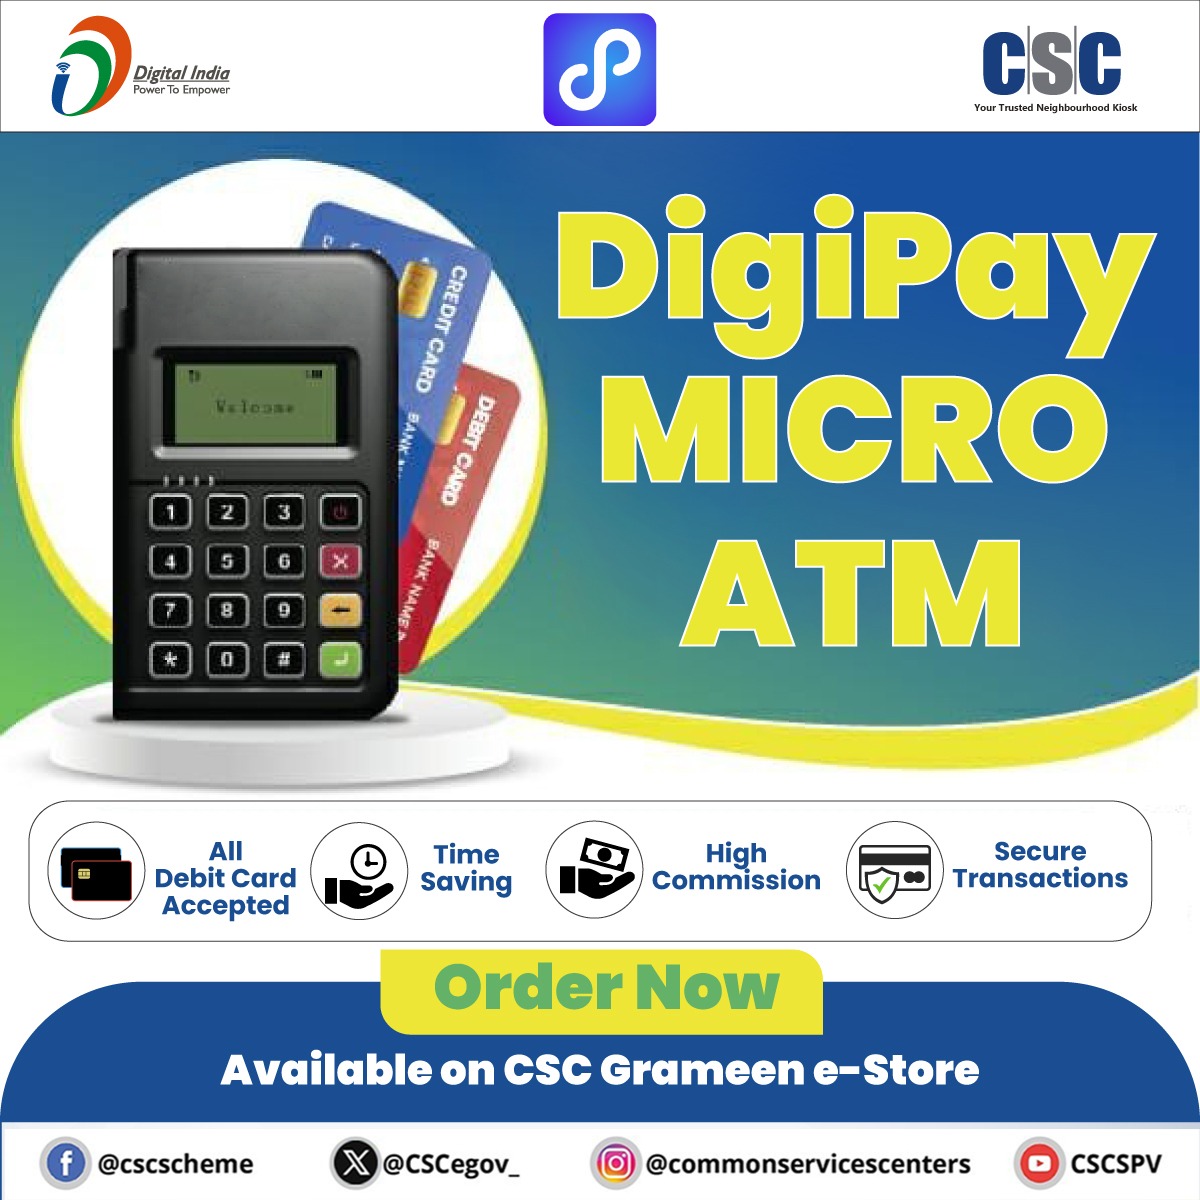 DigiPay Micro ATM is a step forward to help citizens make banking accessible & effective for them.

Hurry!! Book your #DigiPay Micro ATM on #CSC Grameen eStore...

For queries, call 14599 or write to helpdesk@csc.gov.in

#CSCGrameenEStore #MicroATM #FinancialInclusion #MicroATM